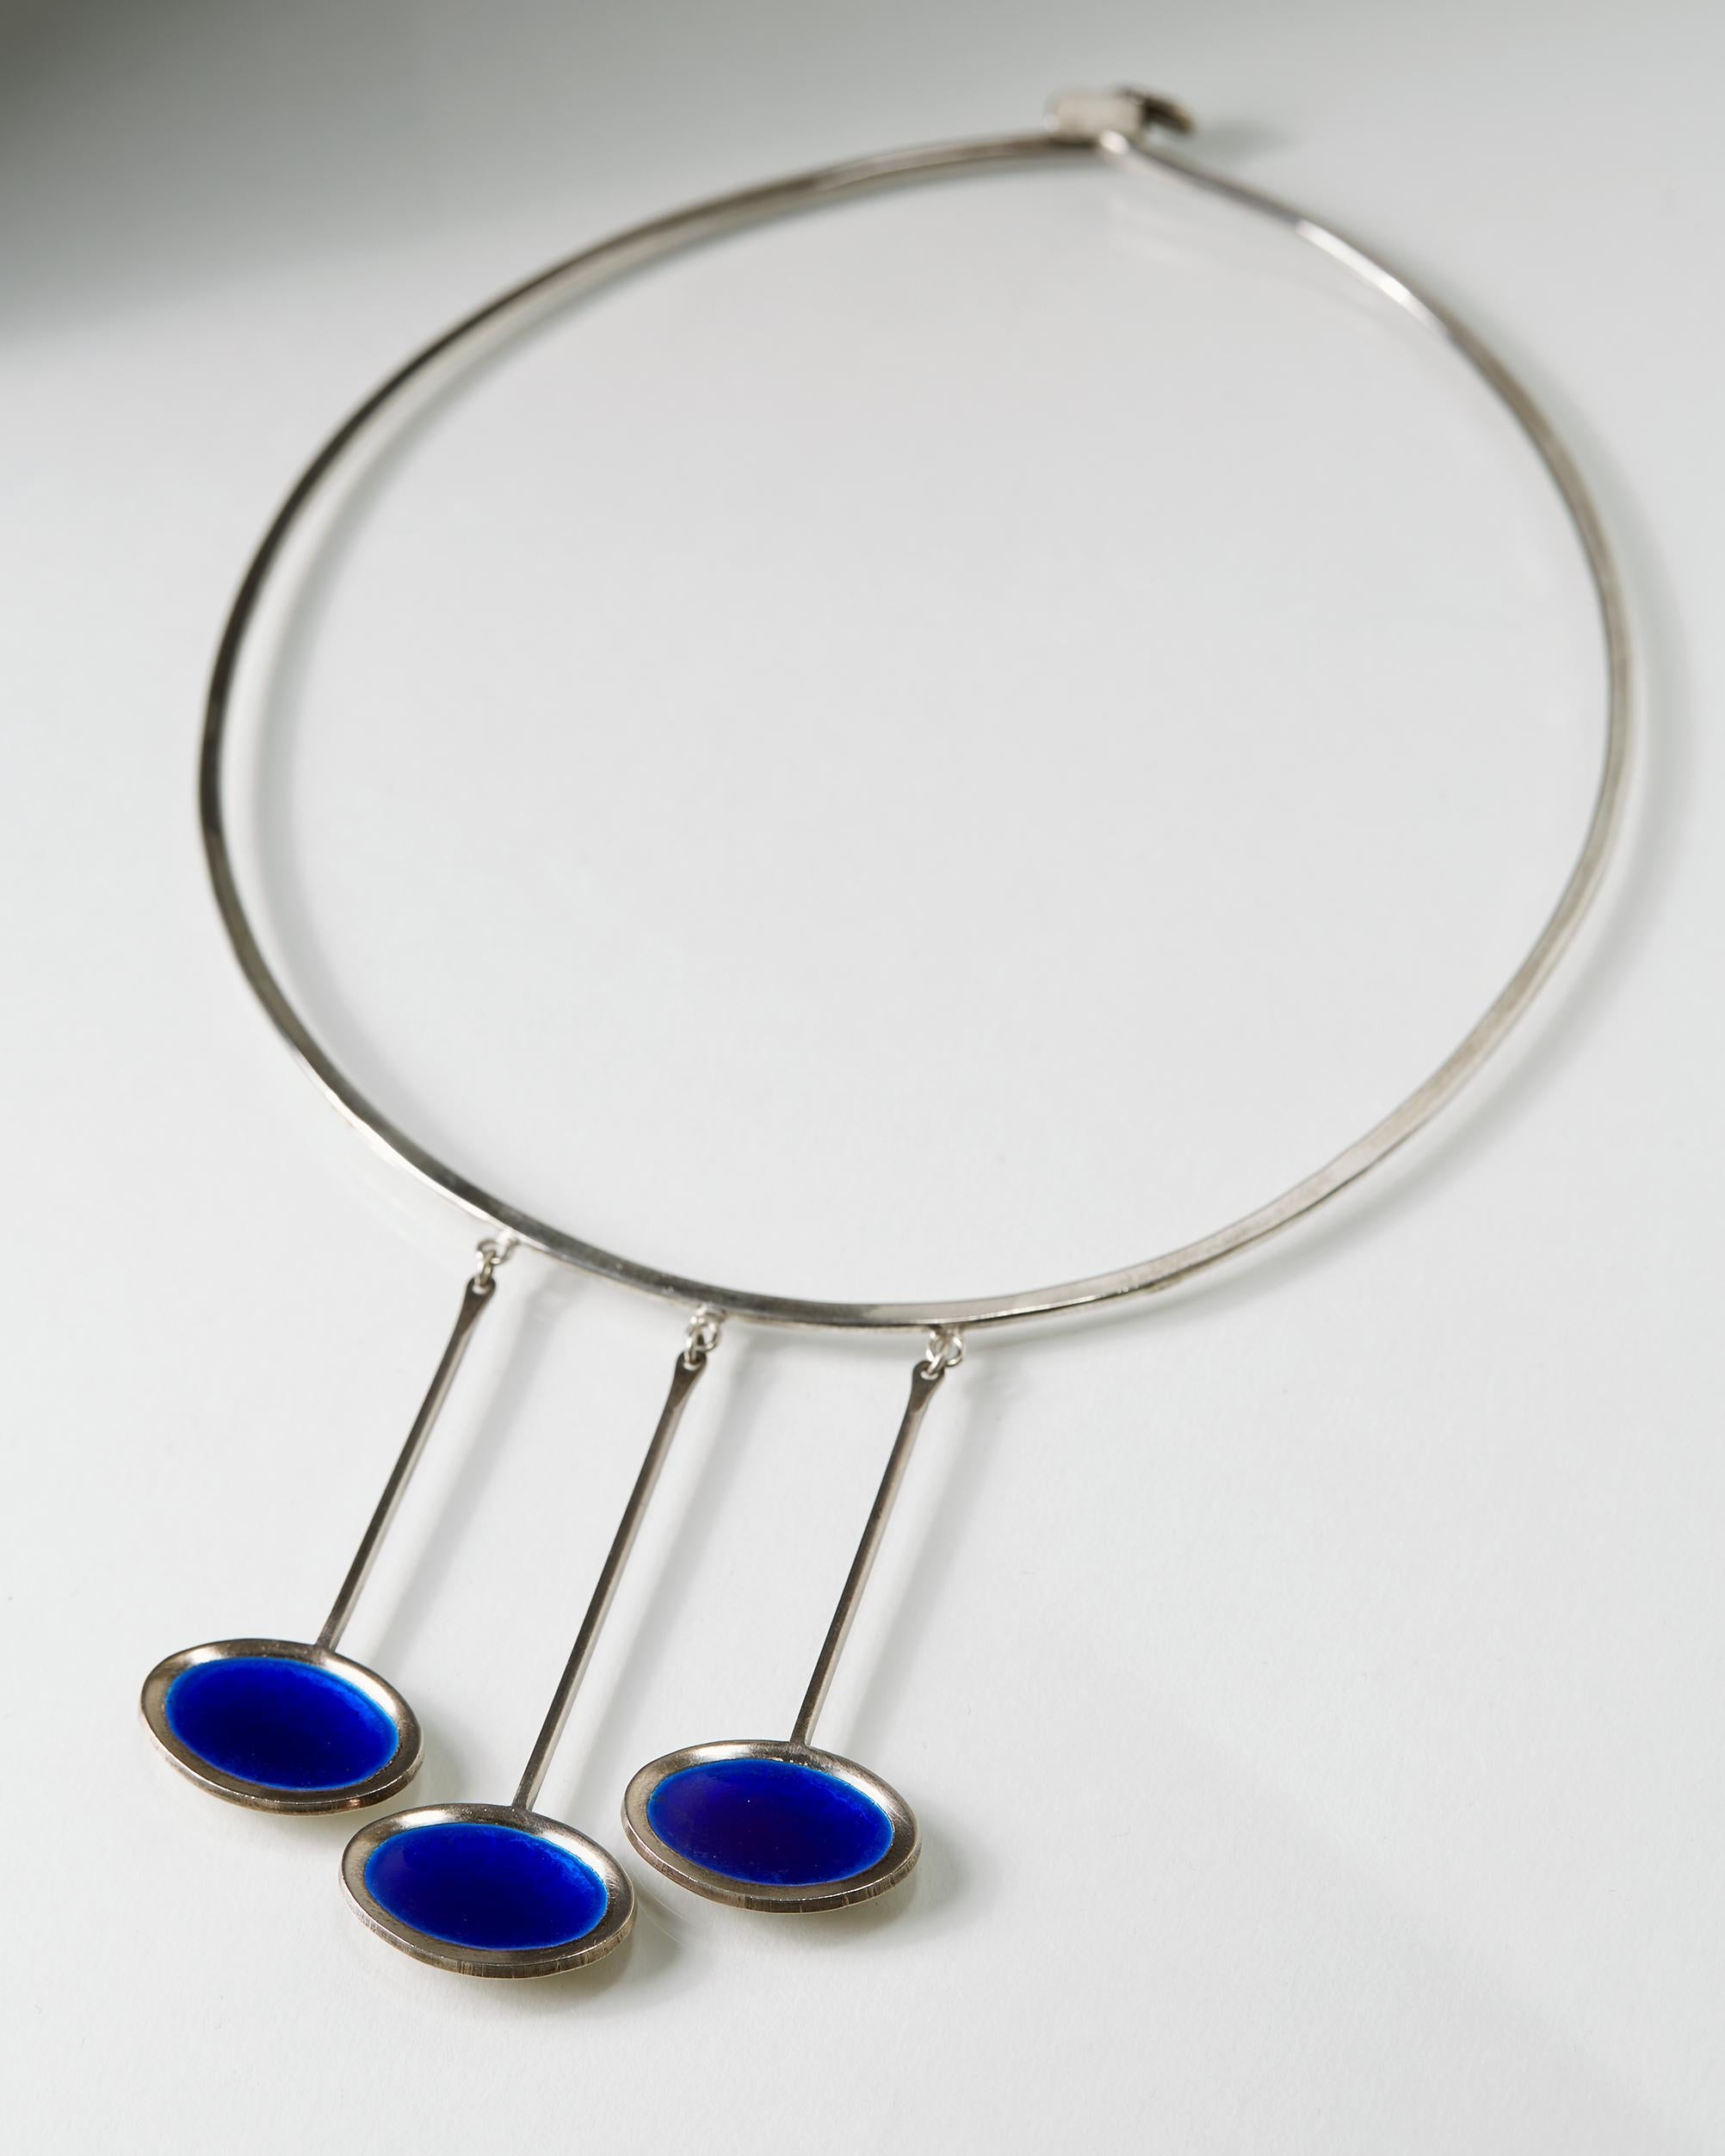 Modern Necklace and Two Pairs of Earrings Designed by Gine Sommerfeldt for J. Tostrup For Sale